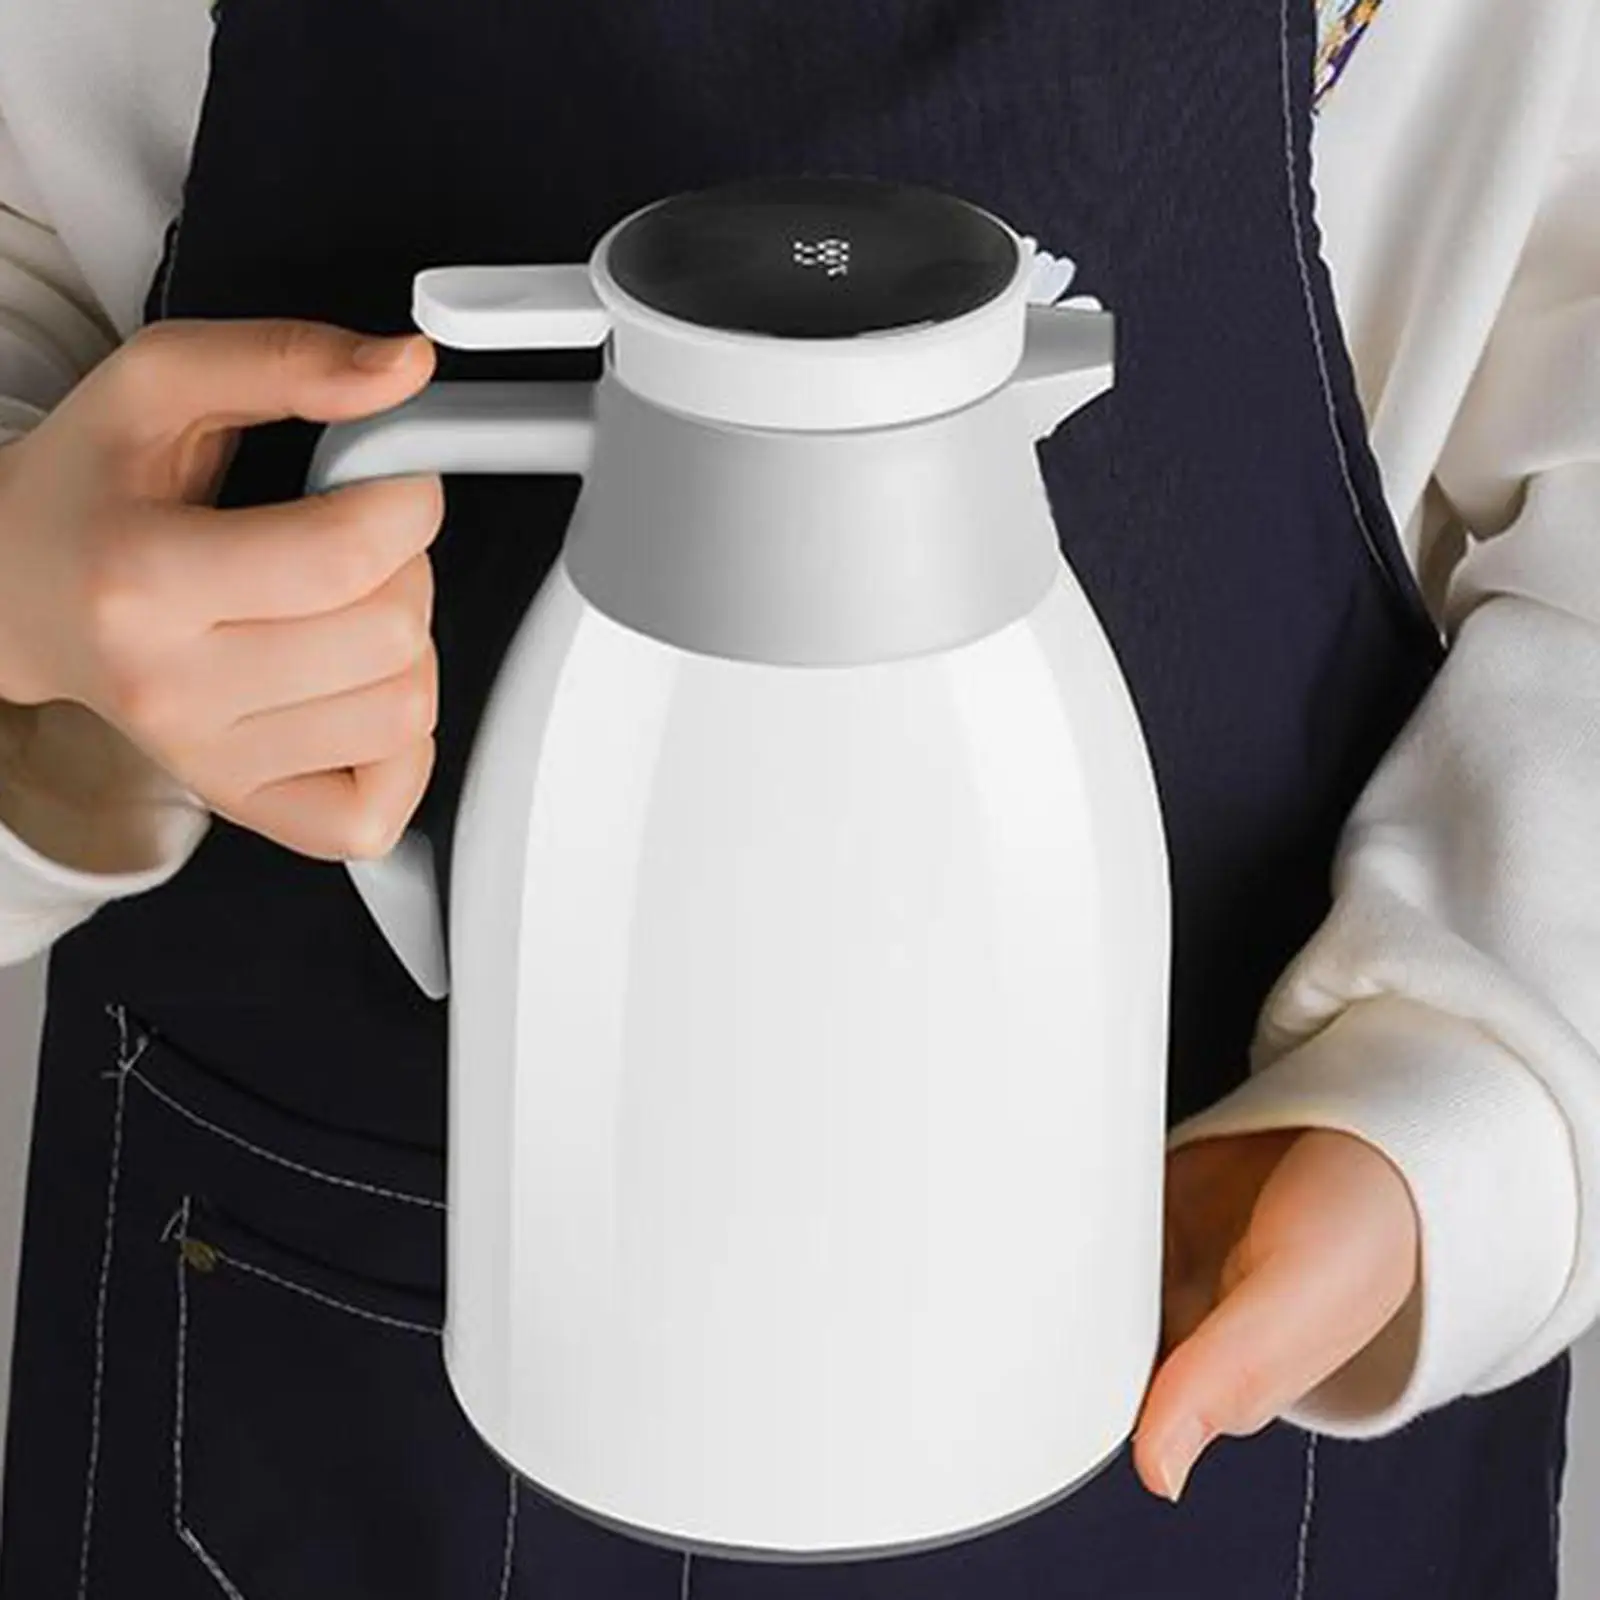 https://ae01.alicdn.com/kf/Sa4e056df85c8430fbe884599d913ba84O/Intelligent-Electric-Kettle-Heat-Resistant-Glass-Liner-Insulation-Pot-for-Coffee.jpg